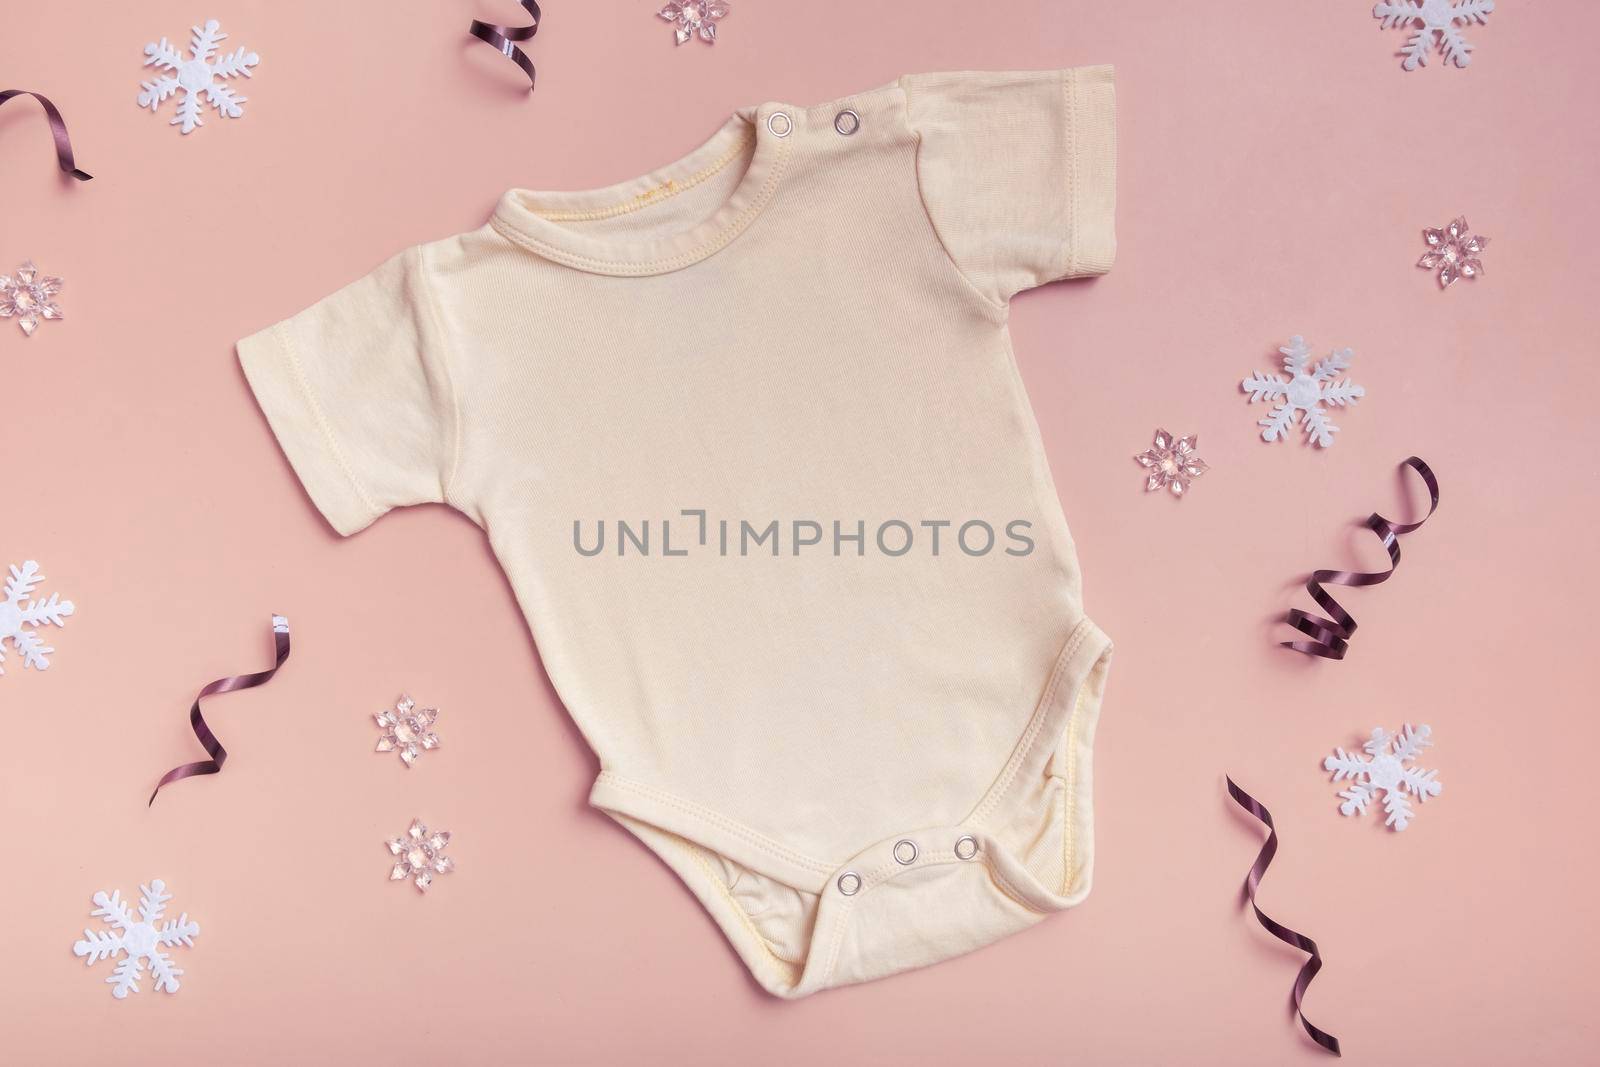 Yellow baby bodysuit mockup for logo, text or design on pink background with winter decotations top view by ssvimaliss